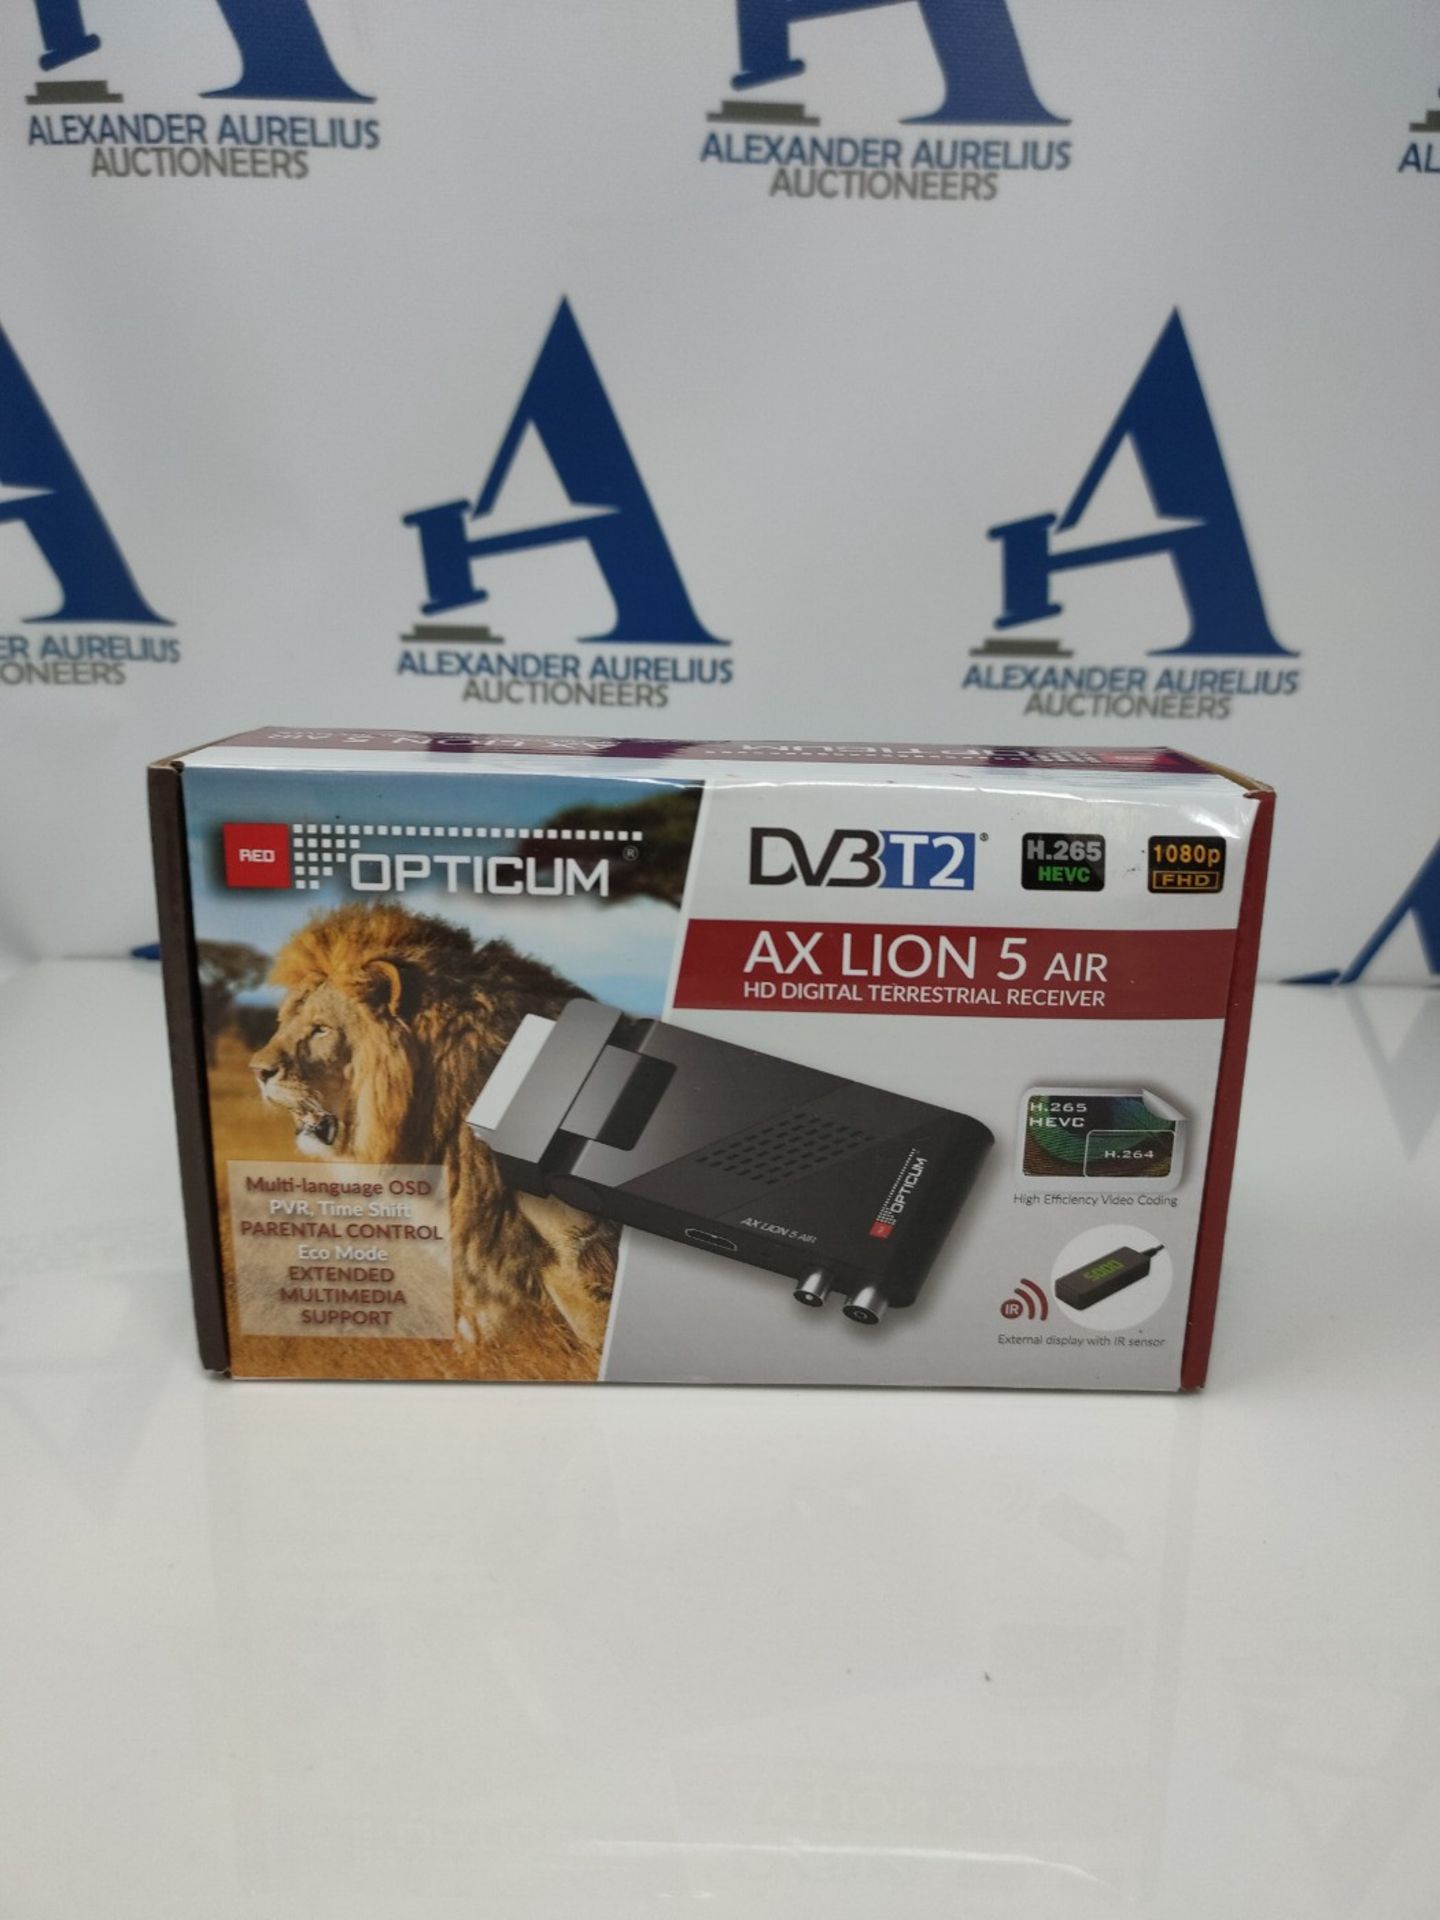 RED OPTICUM AX Lion 5 Air DVB-T2 H.265 Receiver with Recording Function - External IR - Image 2 of 3